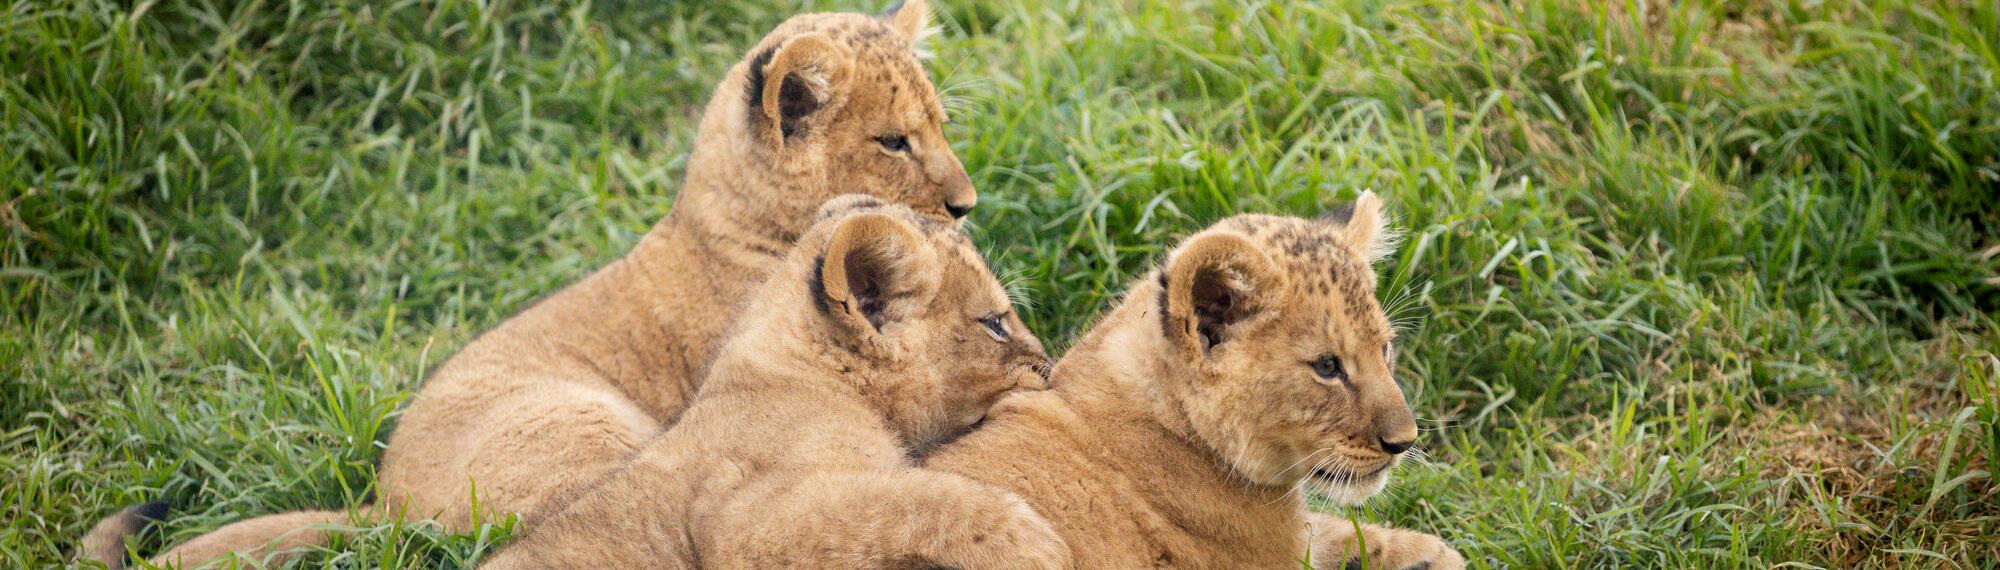 Werribee Open Range Zoo | African Lion Cubs | Membership Lion Naming Competition | 3 cubs cuddled together